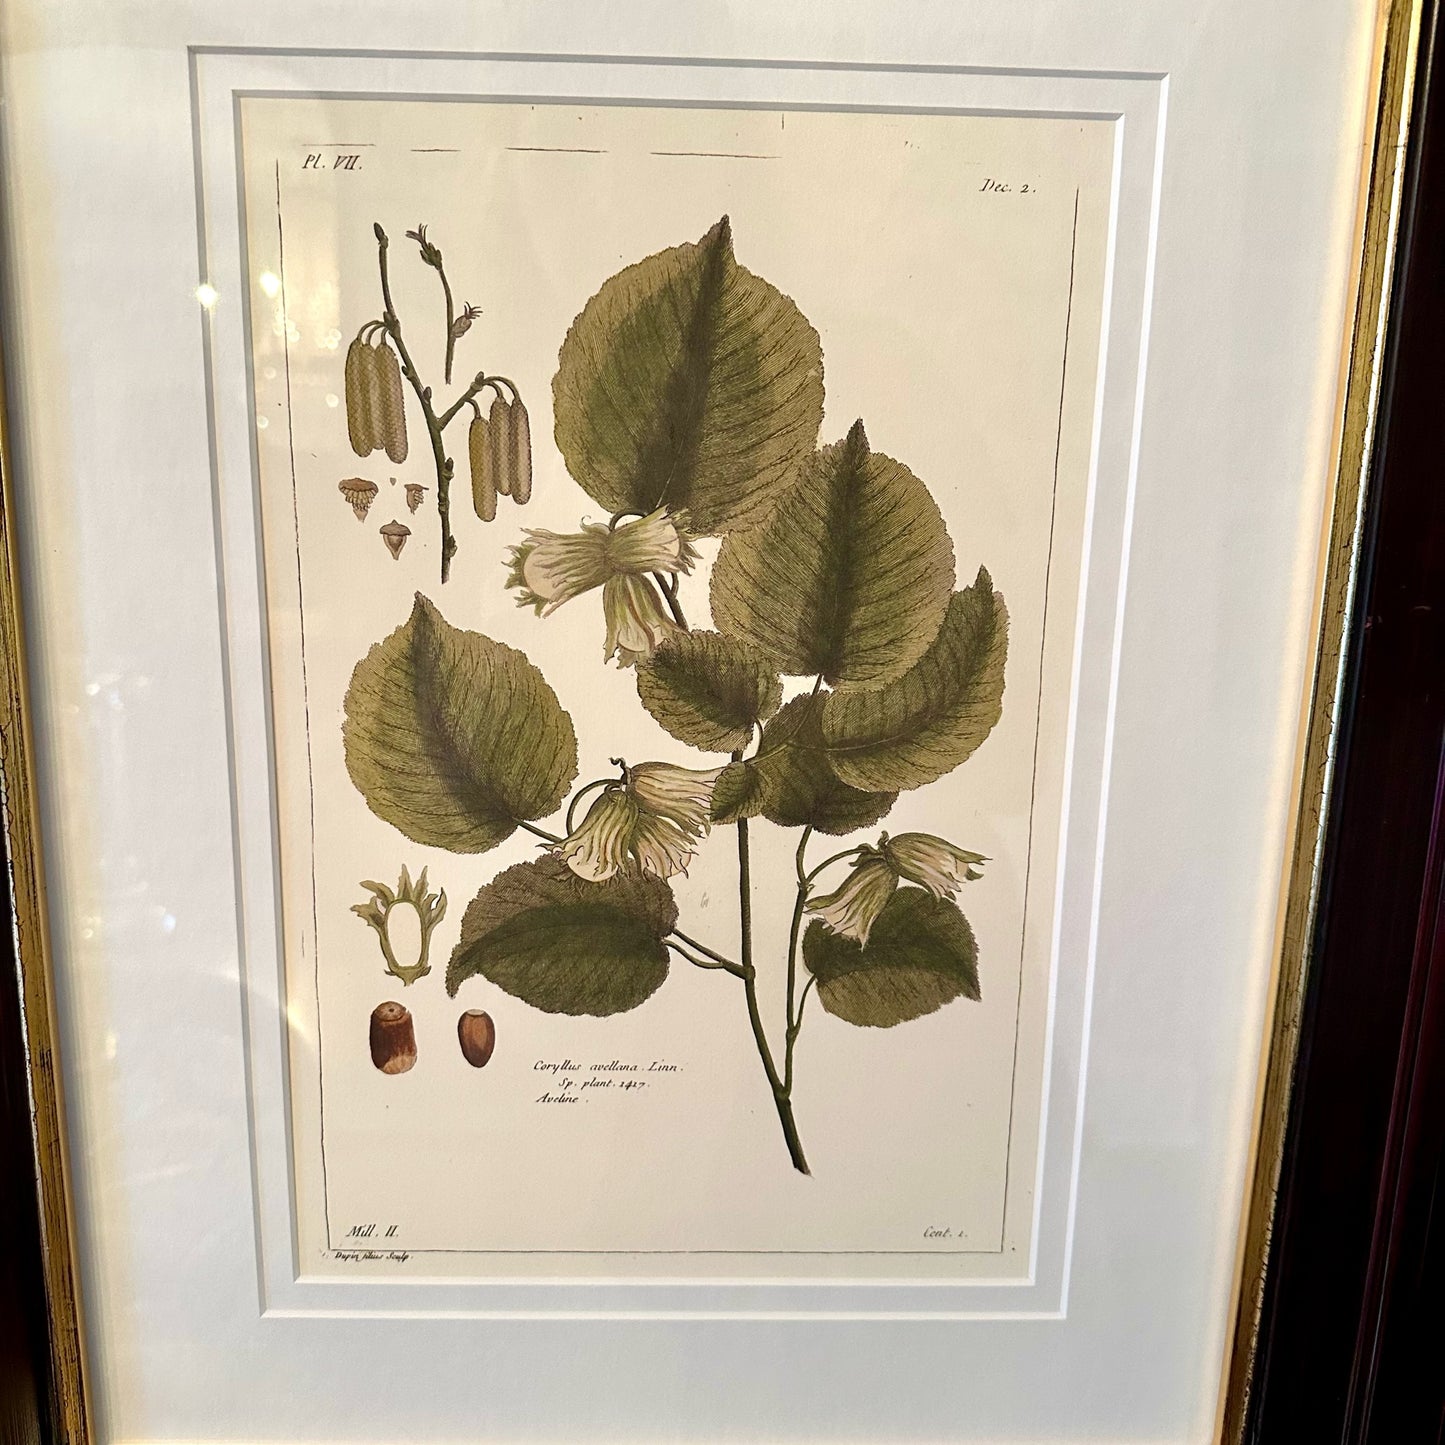 Beautiful (2) Pair of Botanical Prints in Rich Espresso Frames